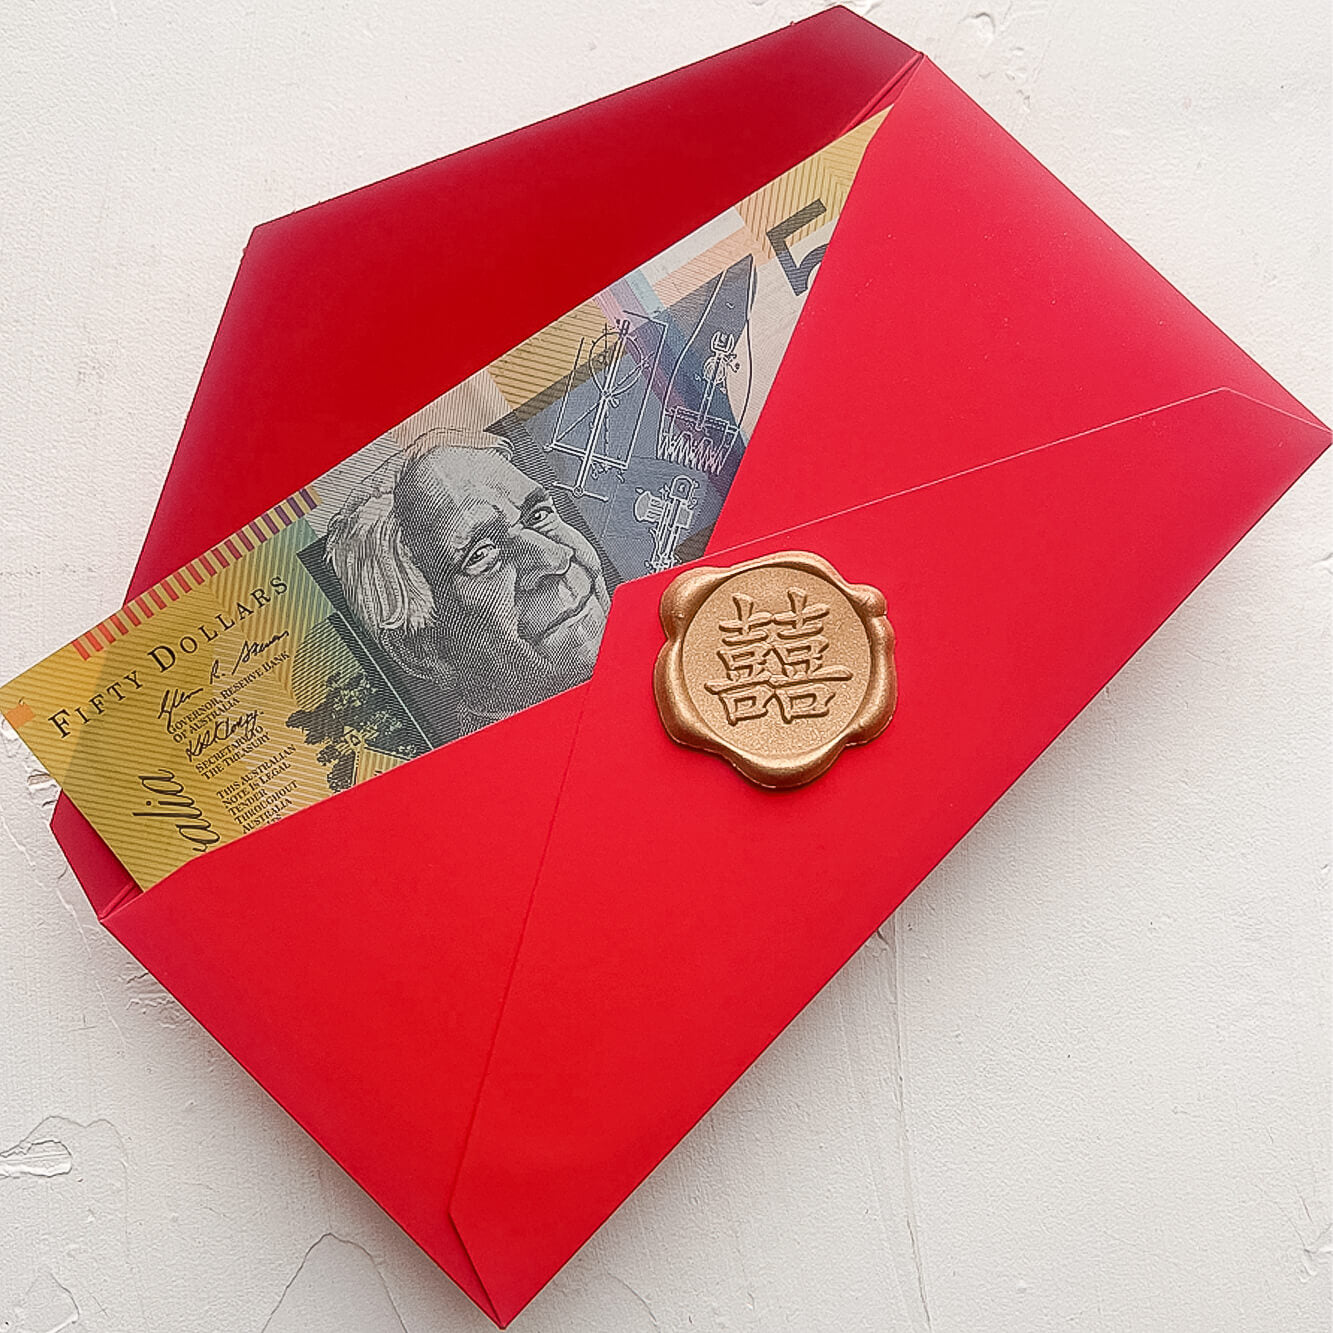 A photo of a red envelope or hongbao or ang pao or lucky packet that is open, showing an Australian fifty dollar note and a premade self adhesive gold wax seal that shows the Chinese calligraphy for double happiness.